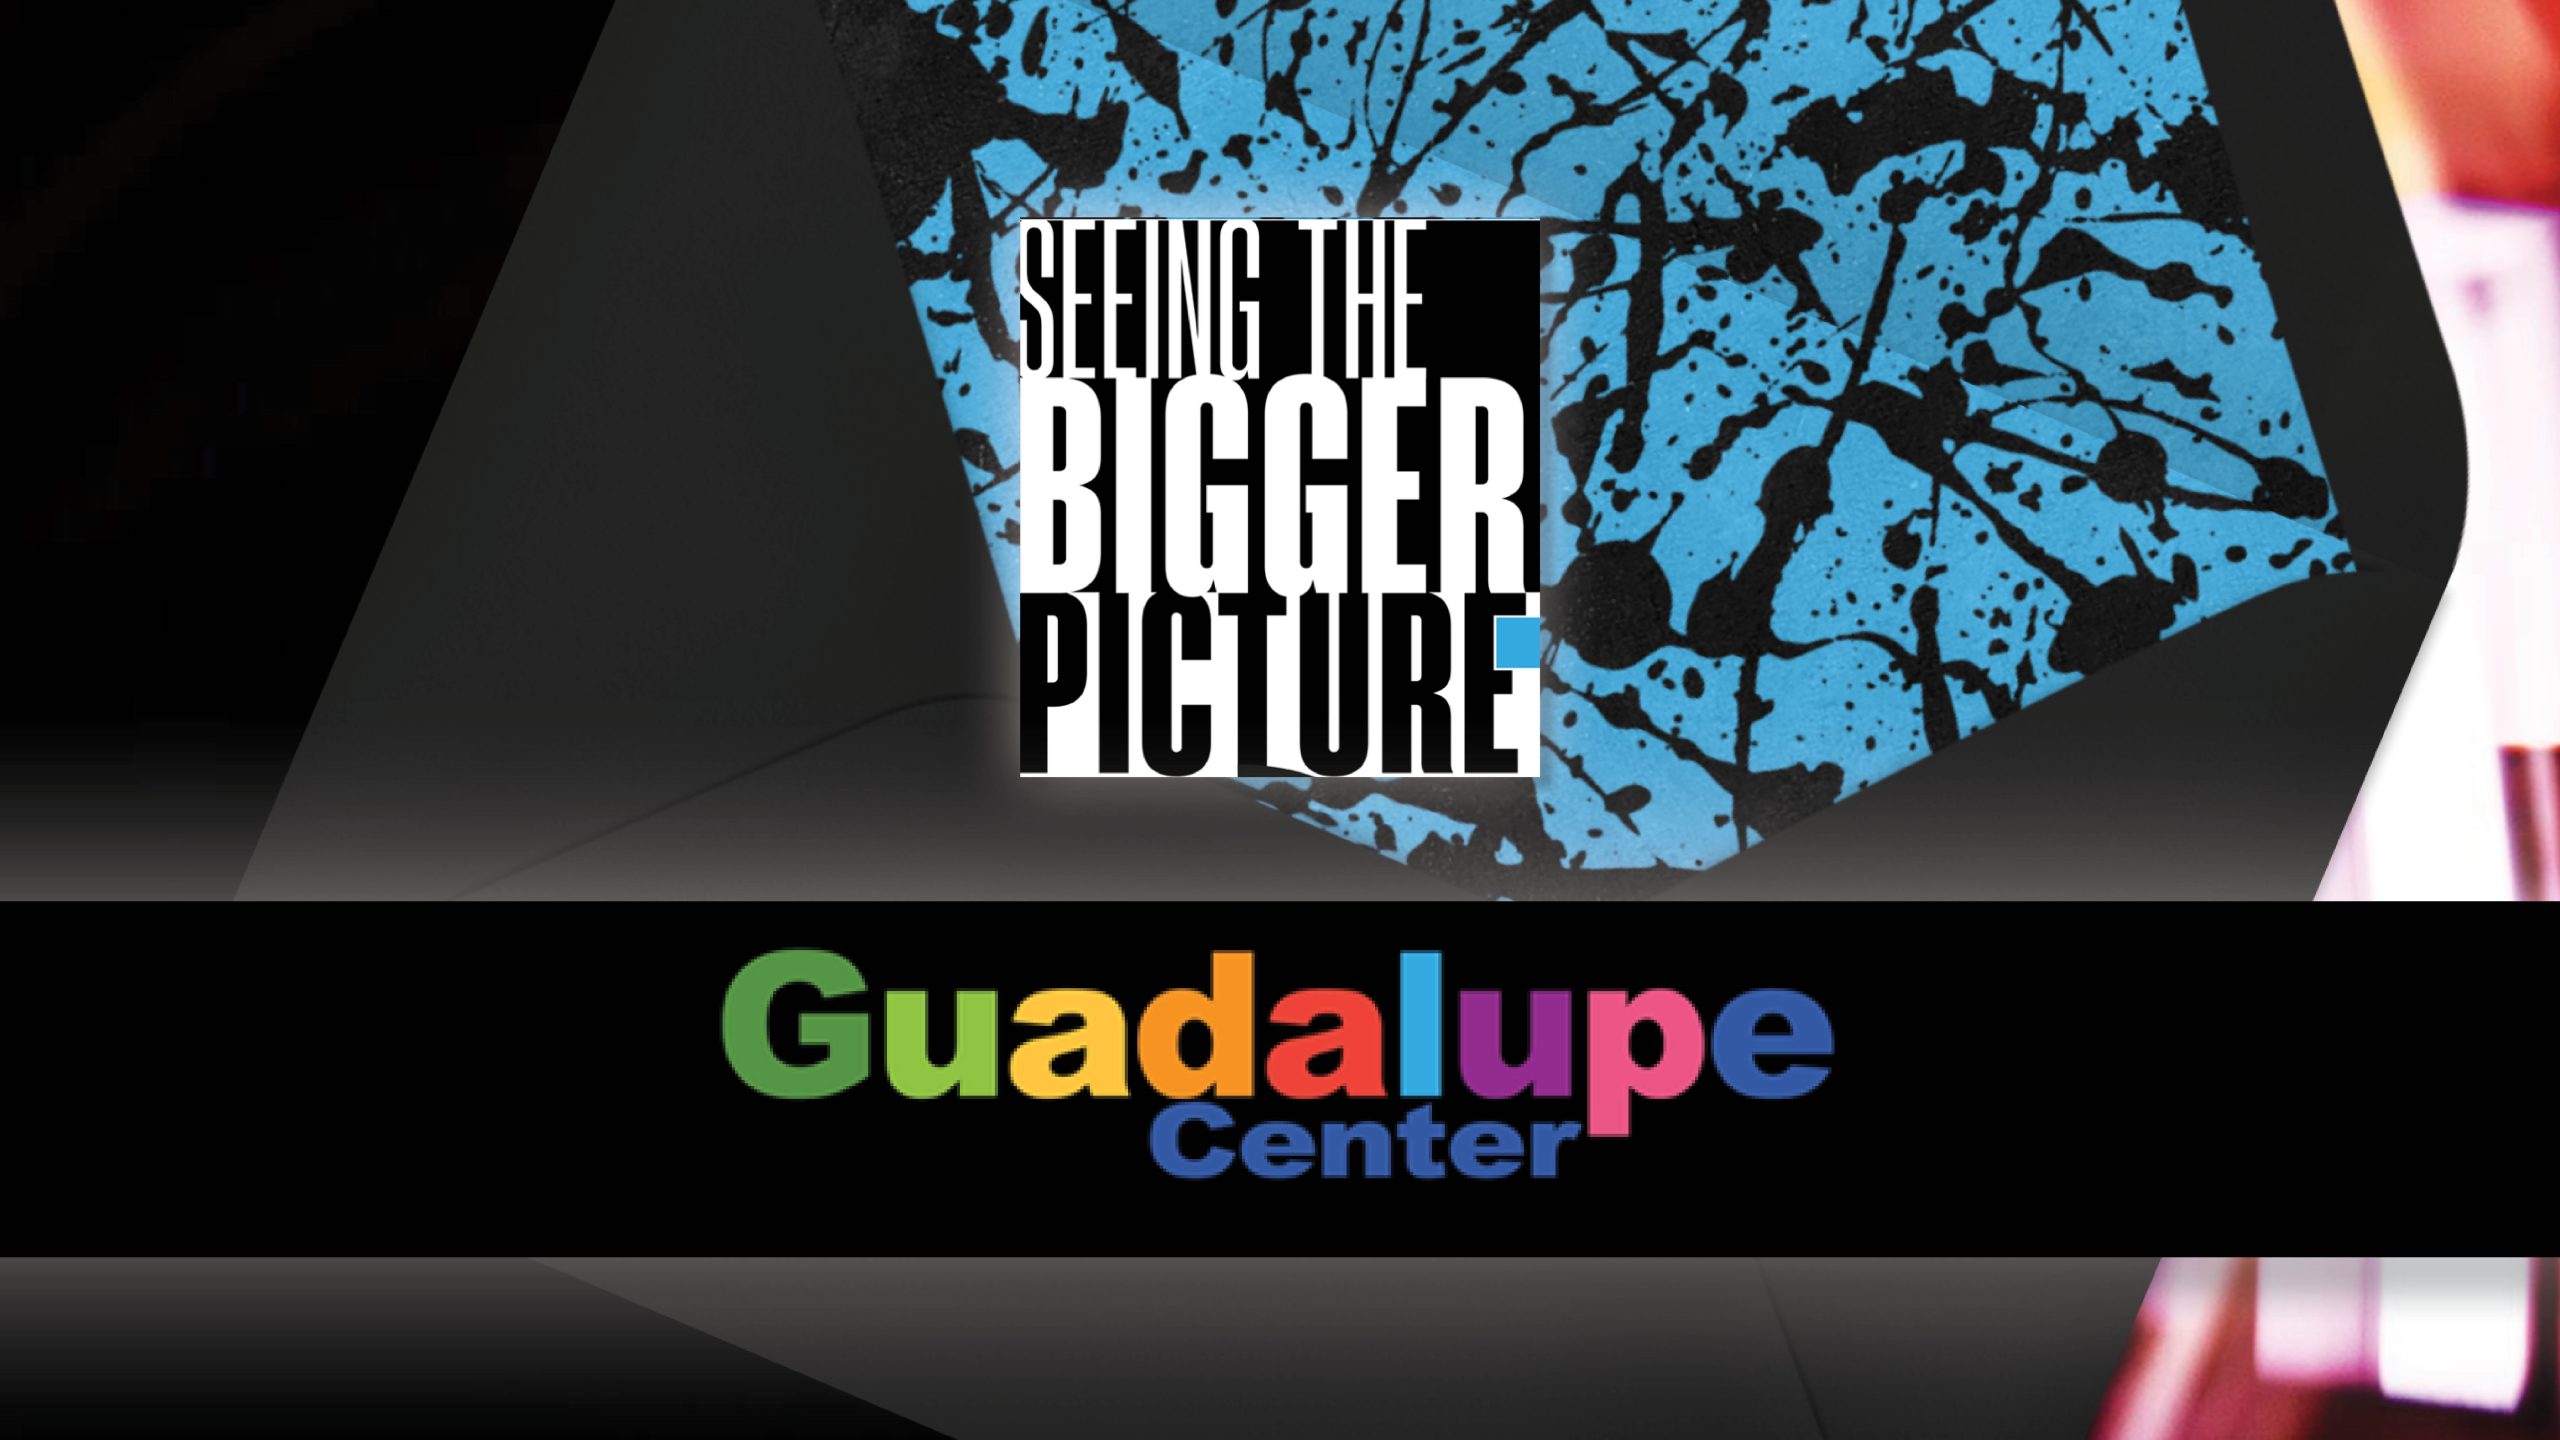 Seeing The Bigger Picture with The Guadalupe Center